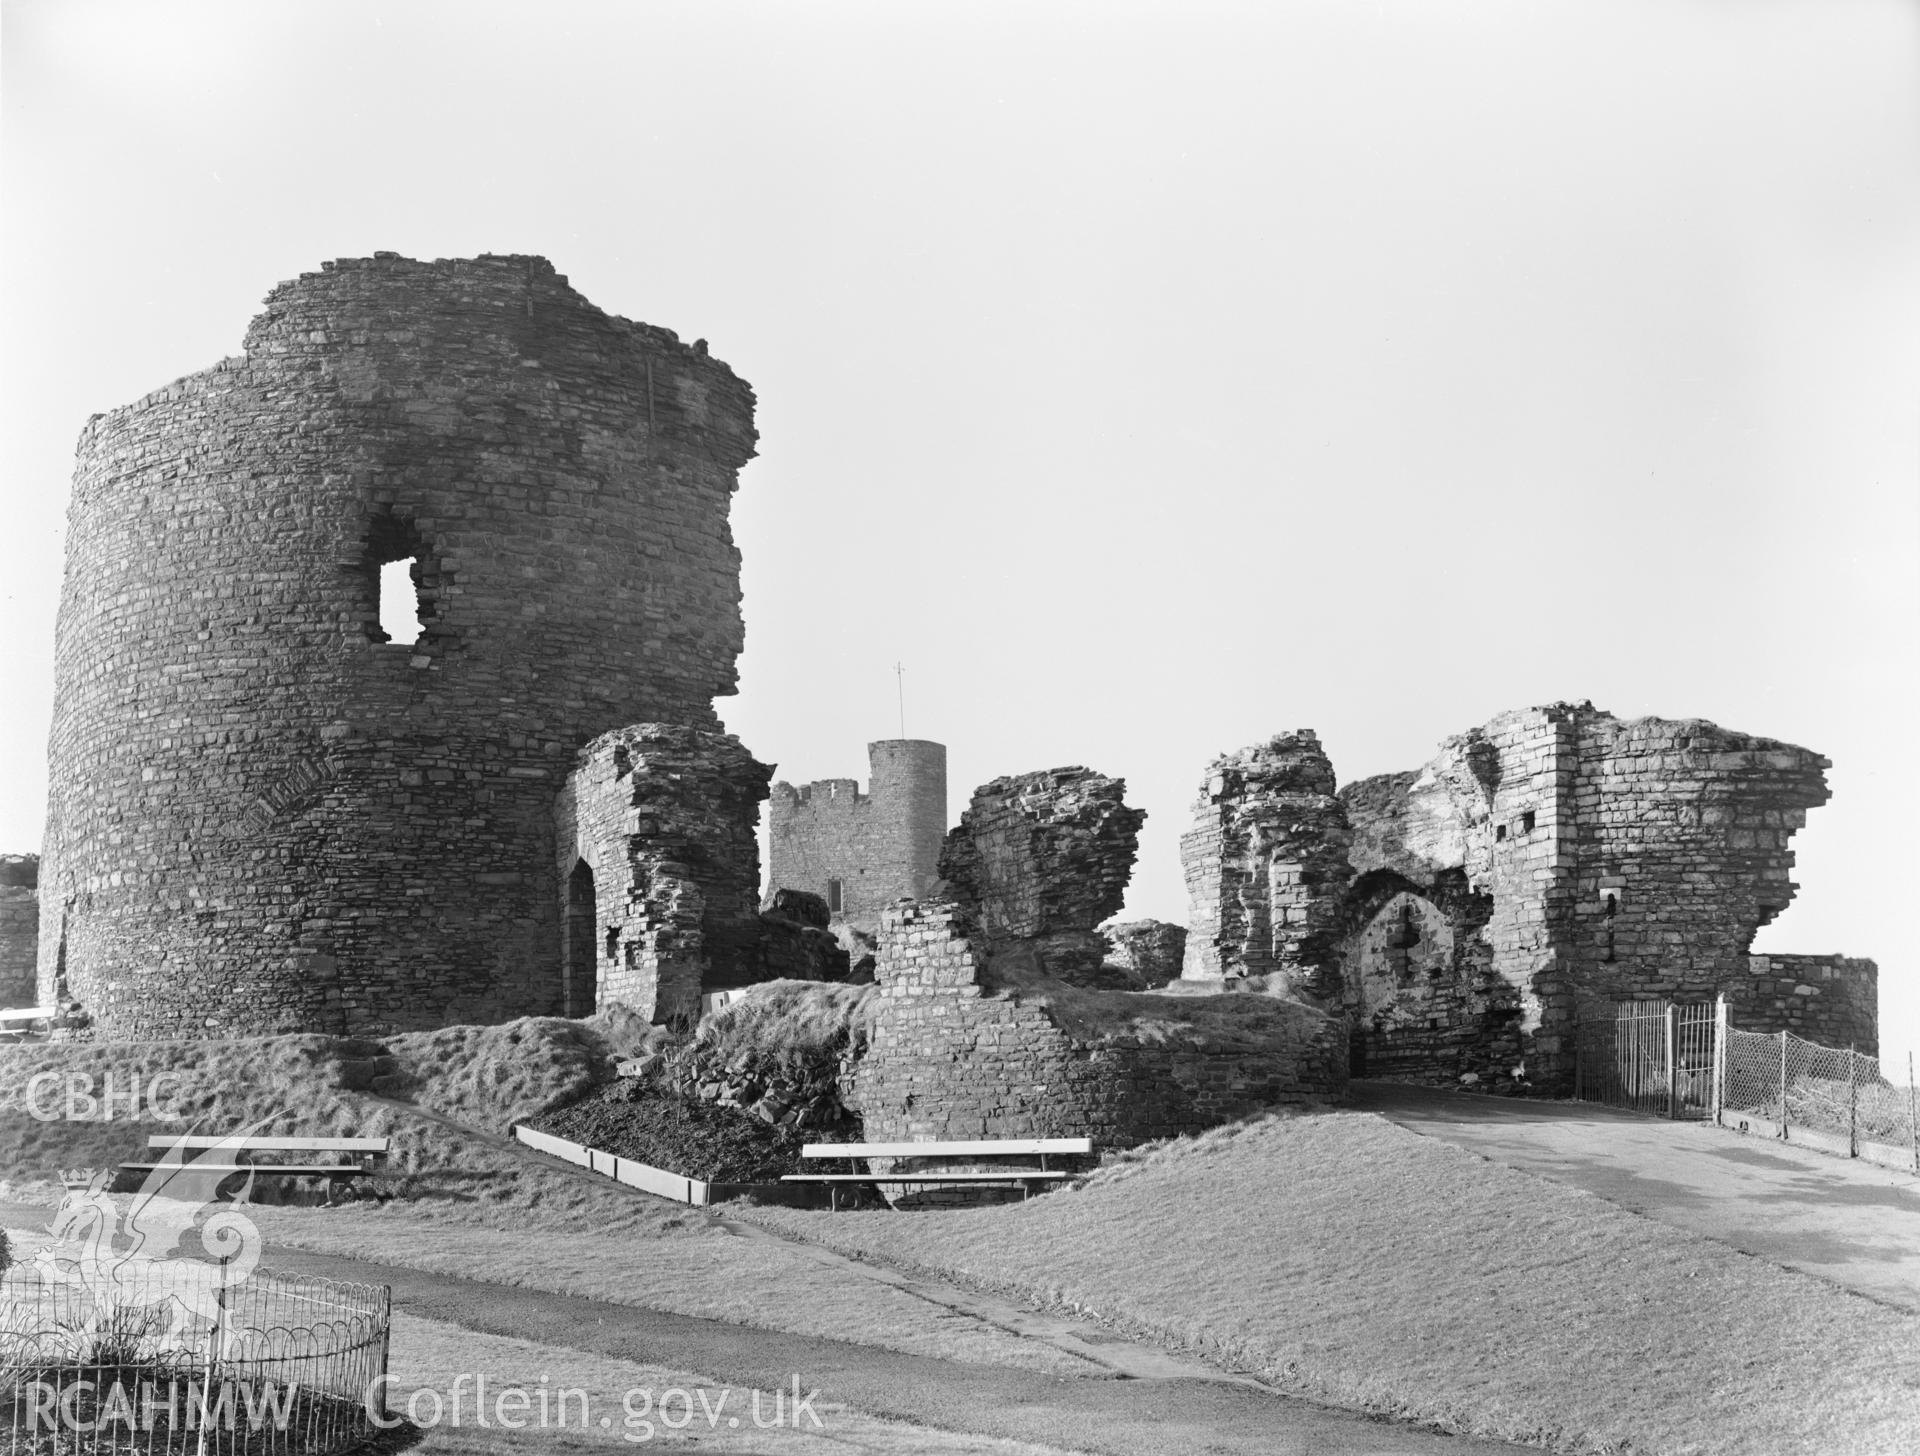 Landscape view of Aberystwyth Castle, showing gate house and north-west postern, taken 25.01.65.